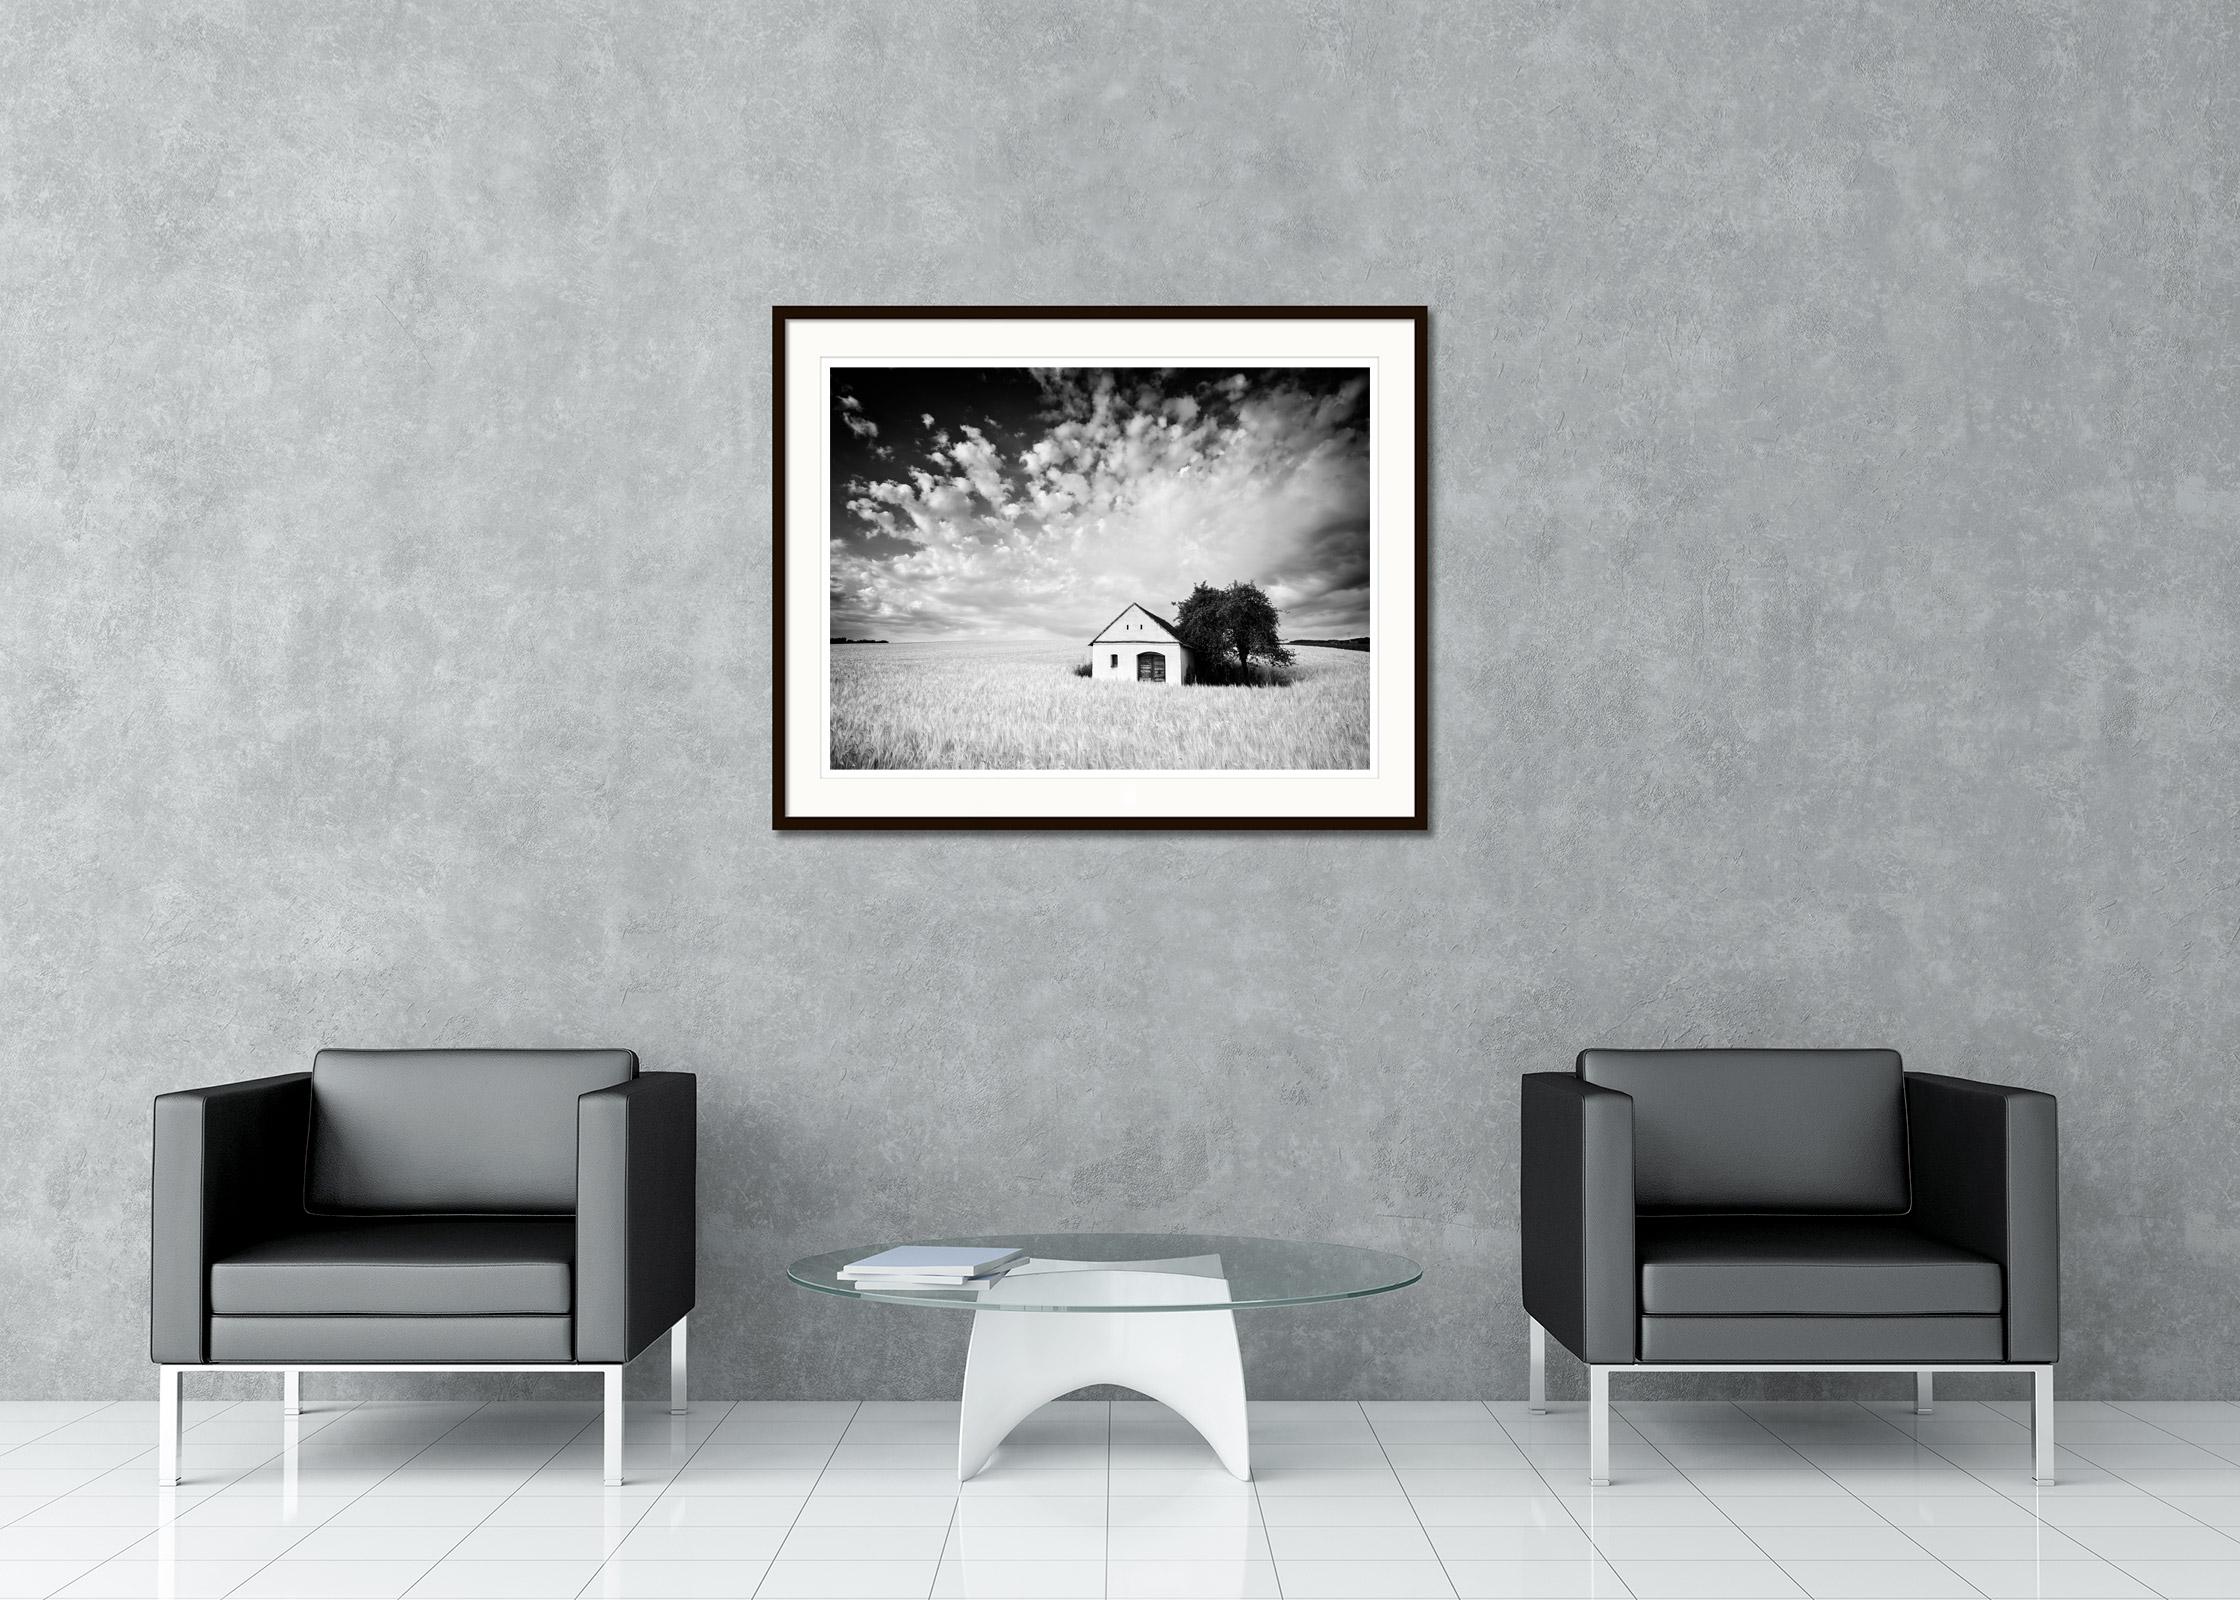 Black and white fine art landscape photography print. Wine press house in wheat field, nice clouds, storm, Austria. Archival pigment ink print, edition of 5. Signed, titled, dated and numbered by artist. Certificate of authenticity included. Printed